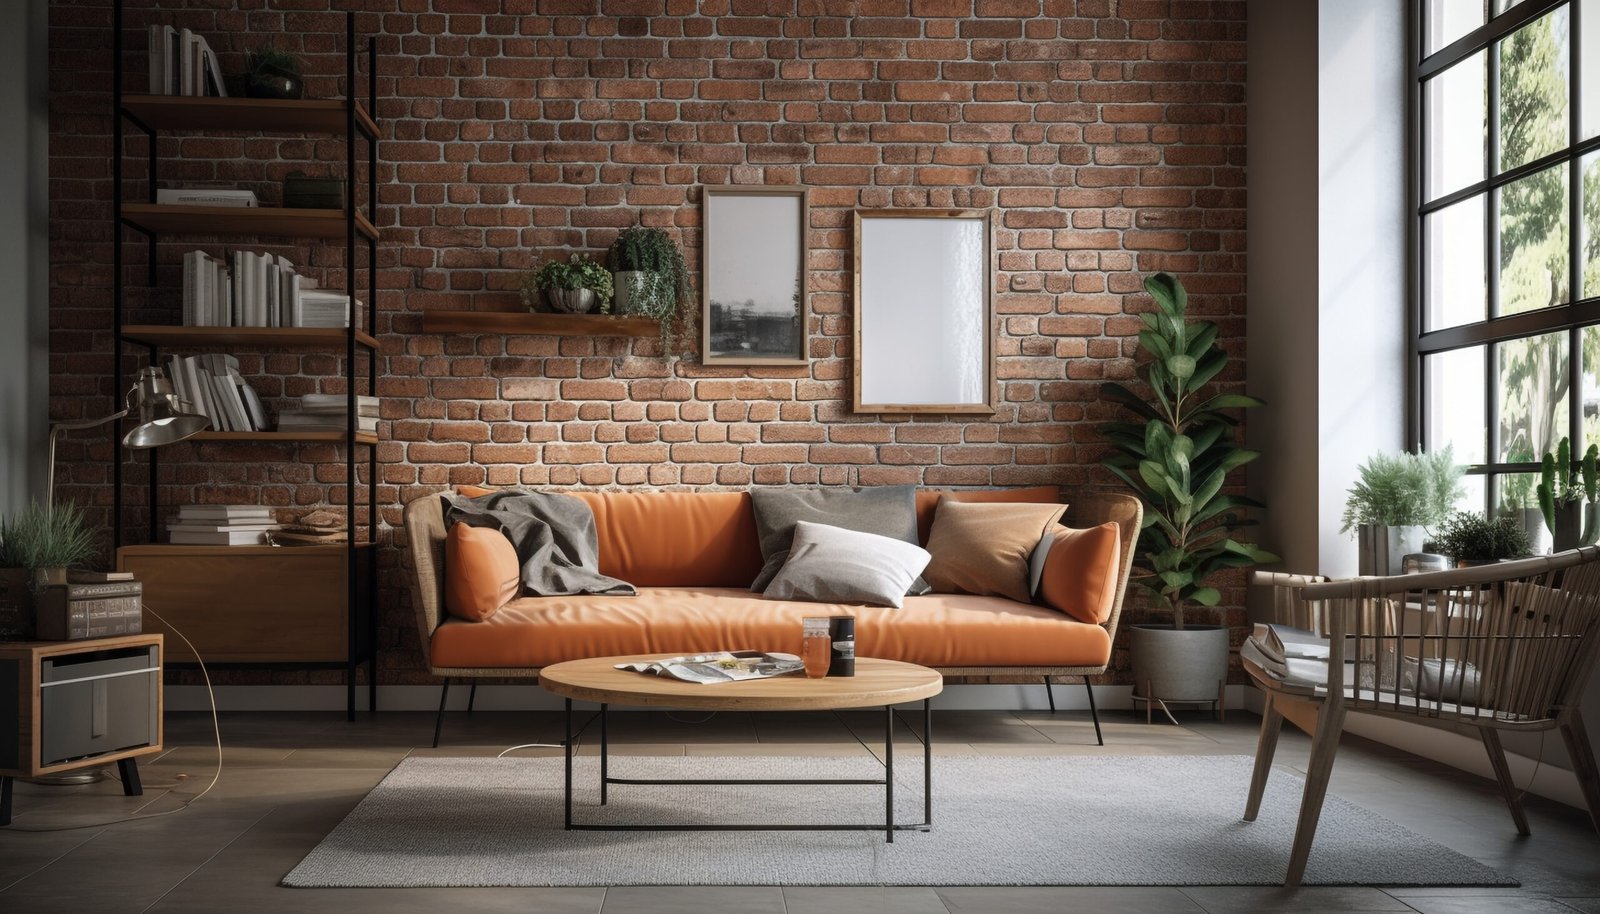 Mid century modern living room with an orange couch, brick wall and wooden details.